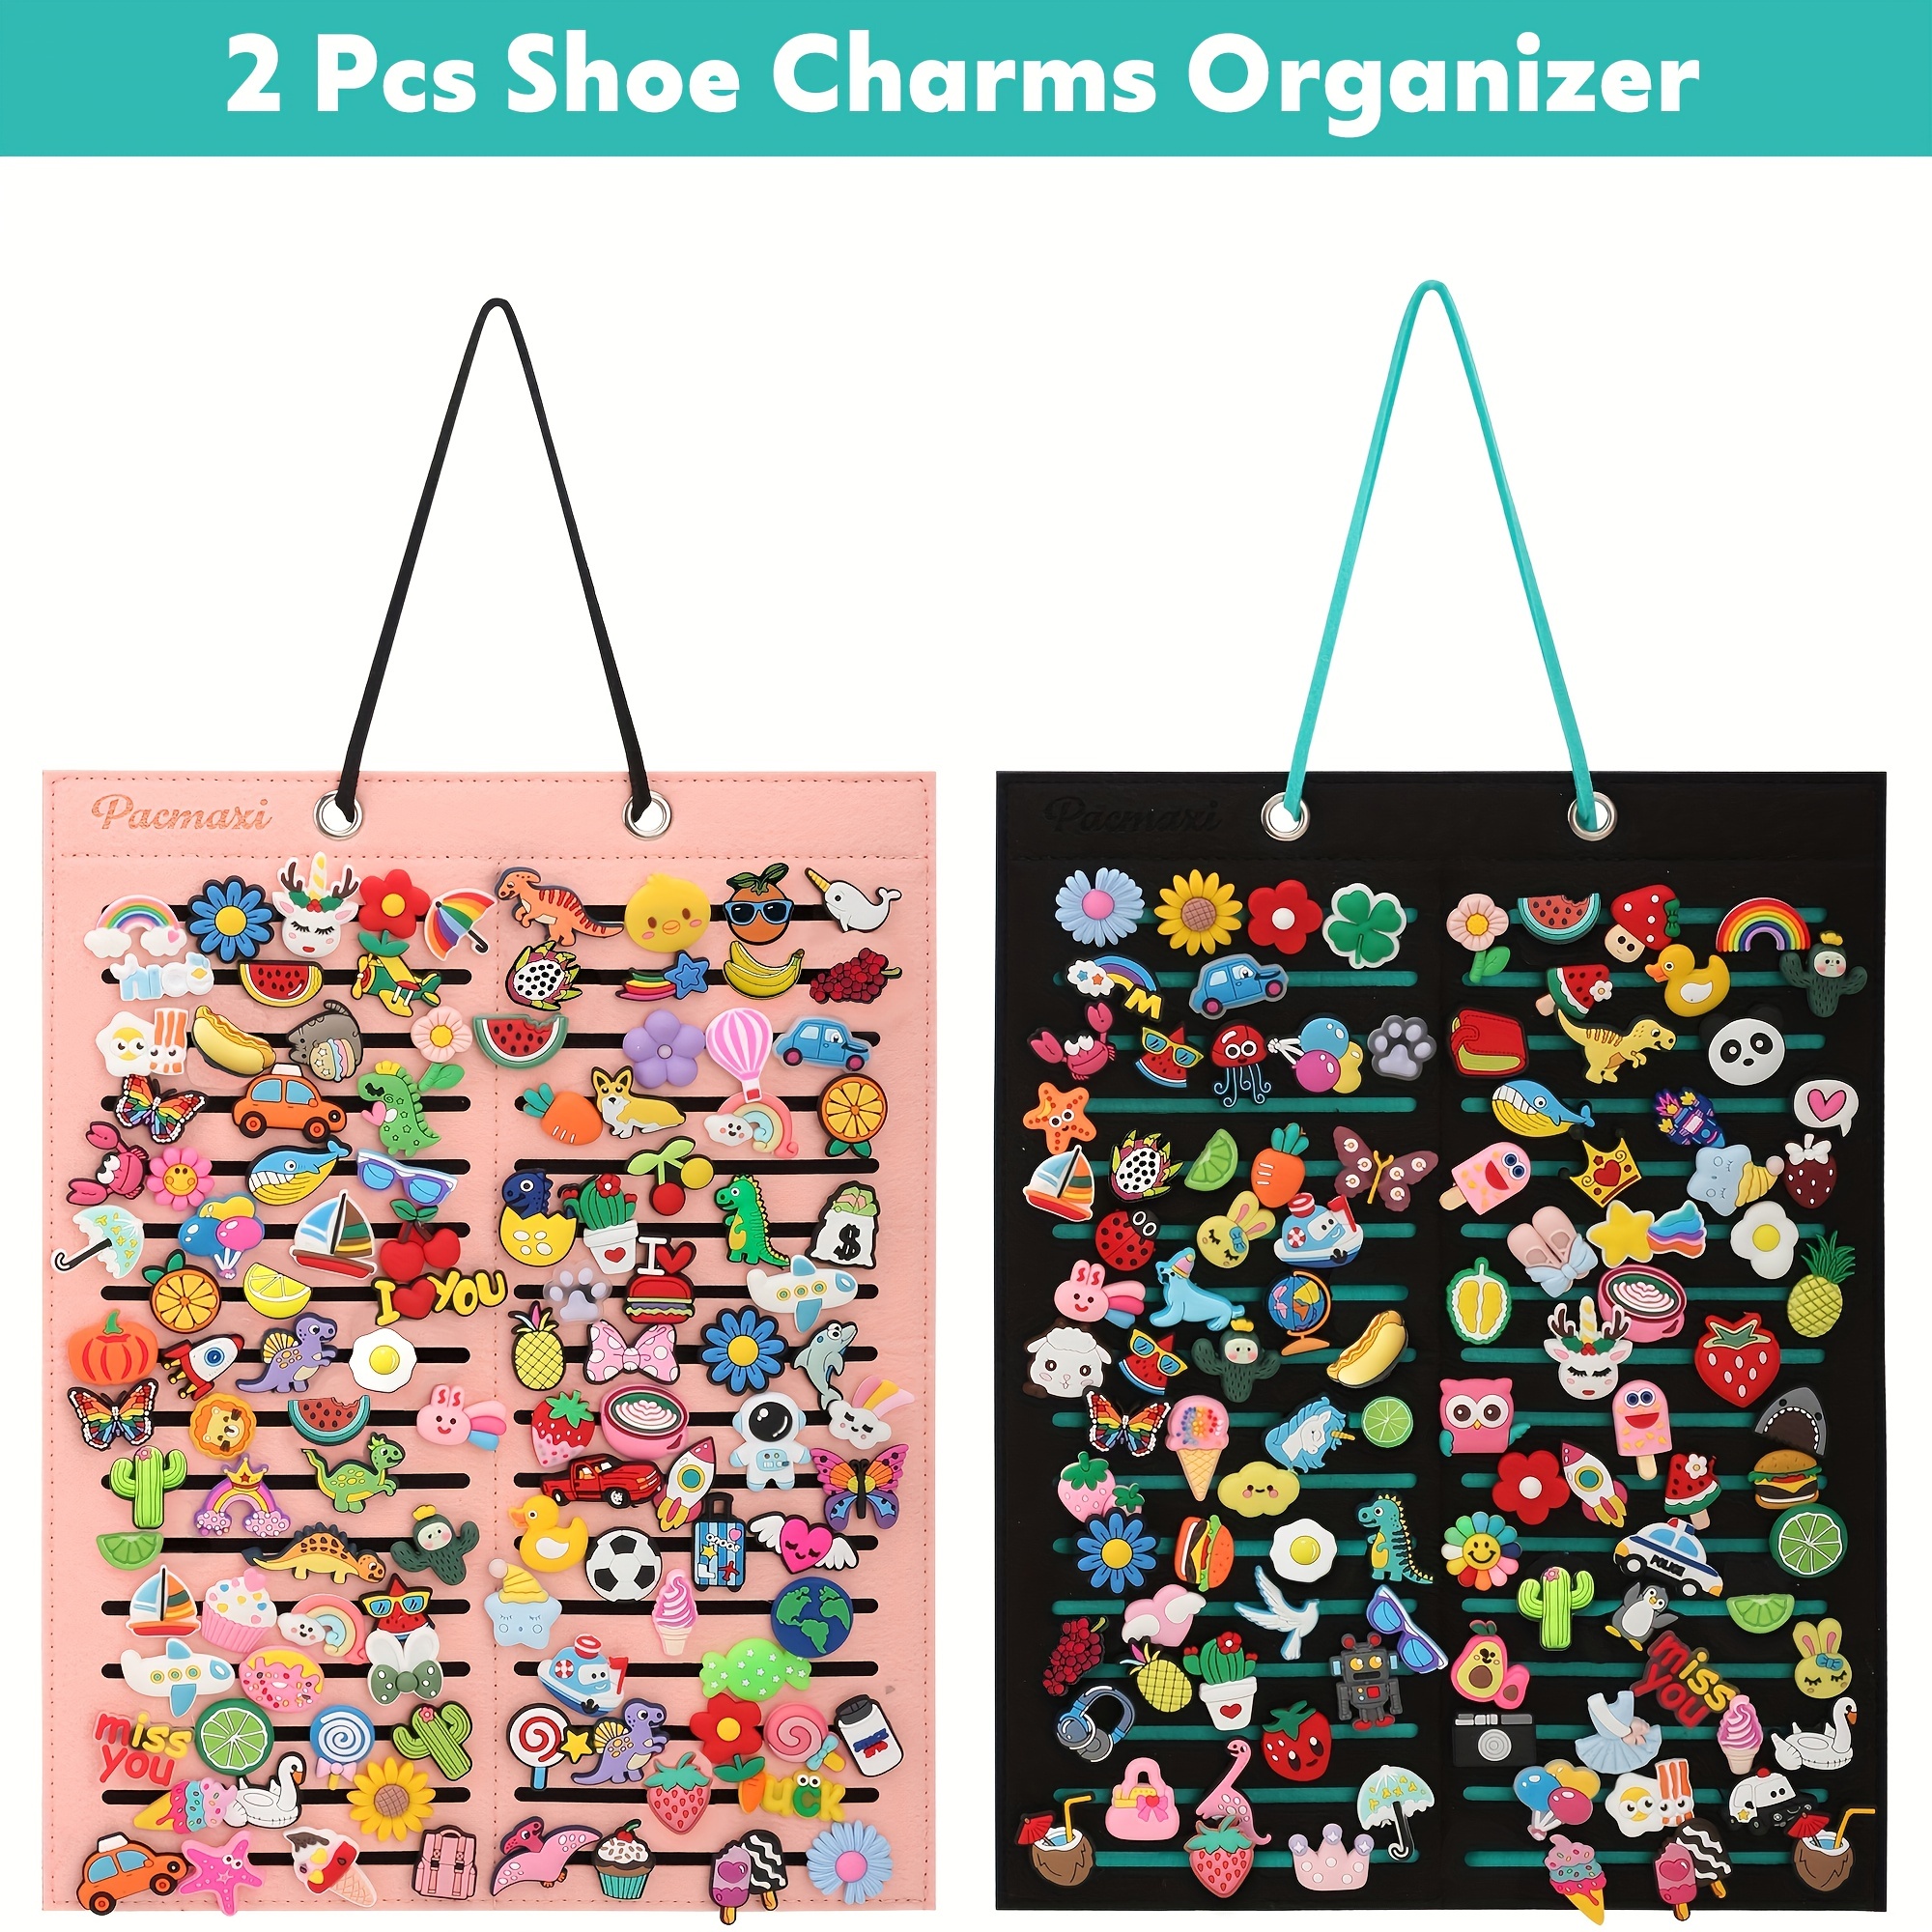 PACMAXI Croc Charms Organizer, Hanging Shoe Charm Holder - 3 Pages, Shoe  Decoration Croc Charms Display, Wall Mounted Display Storage Case for Shoe